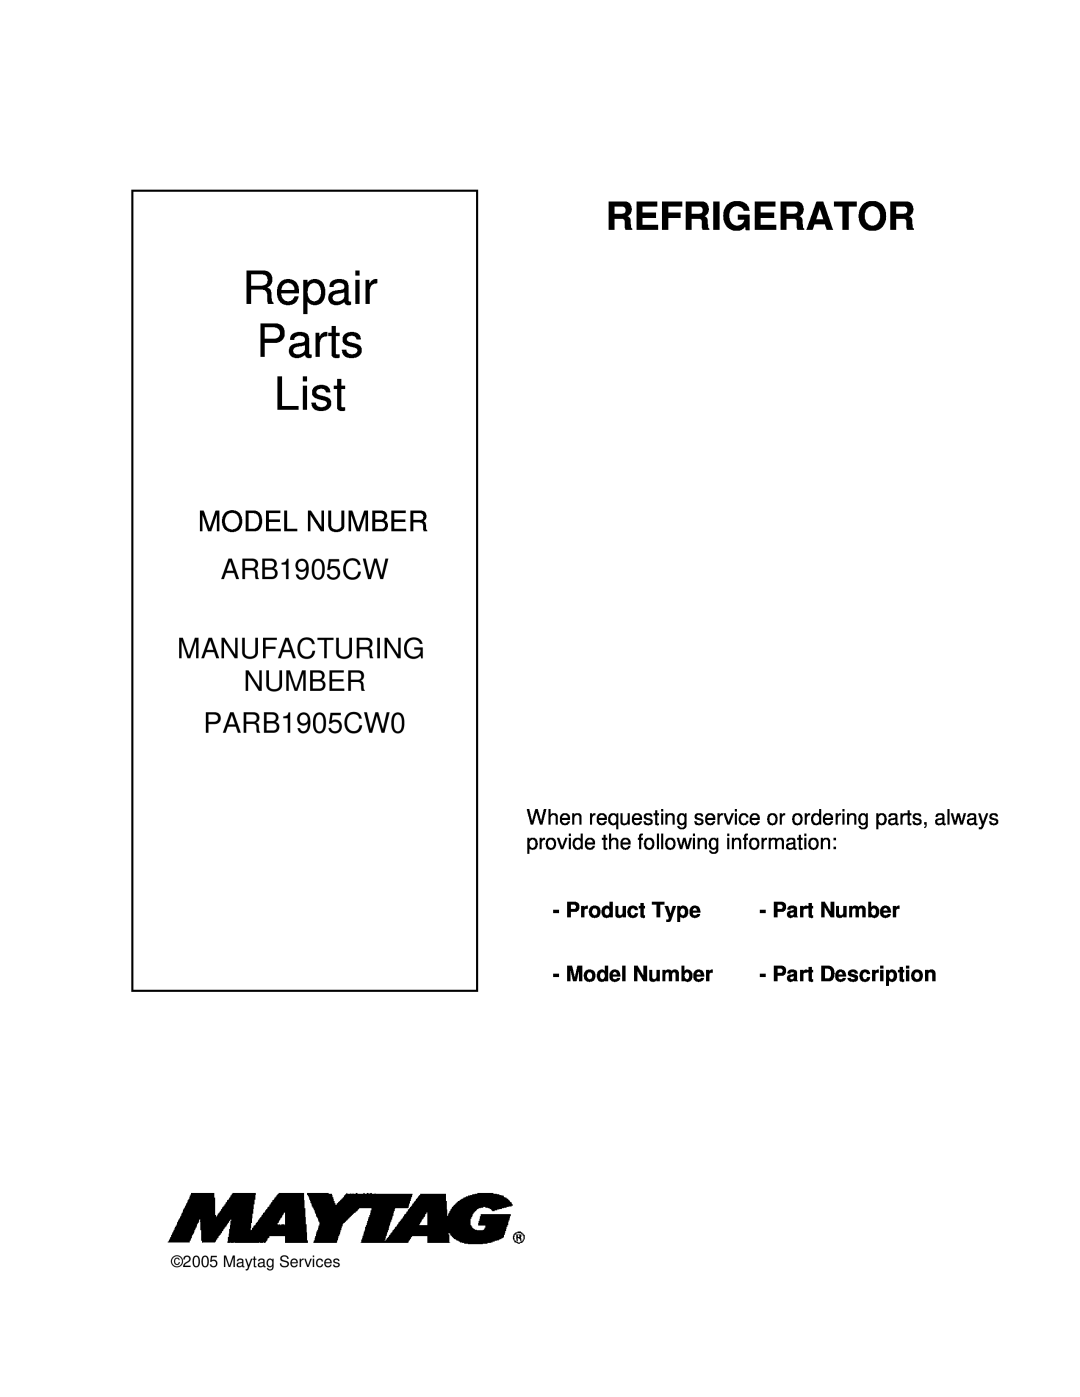 Maytag ARB1905CW manual Product Type, Part Number, Model Number, Part Description, Repair Parts List, Refrigerator 